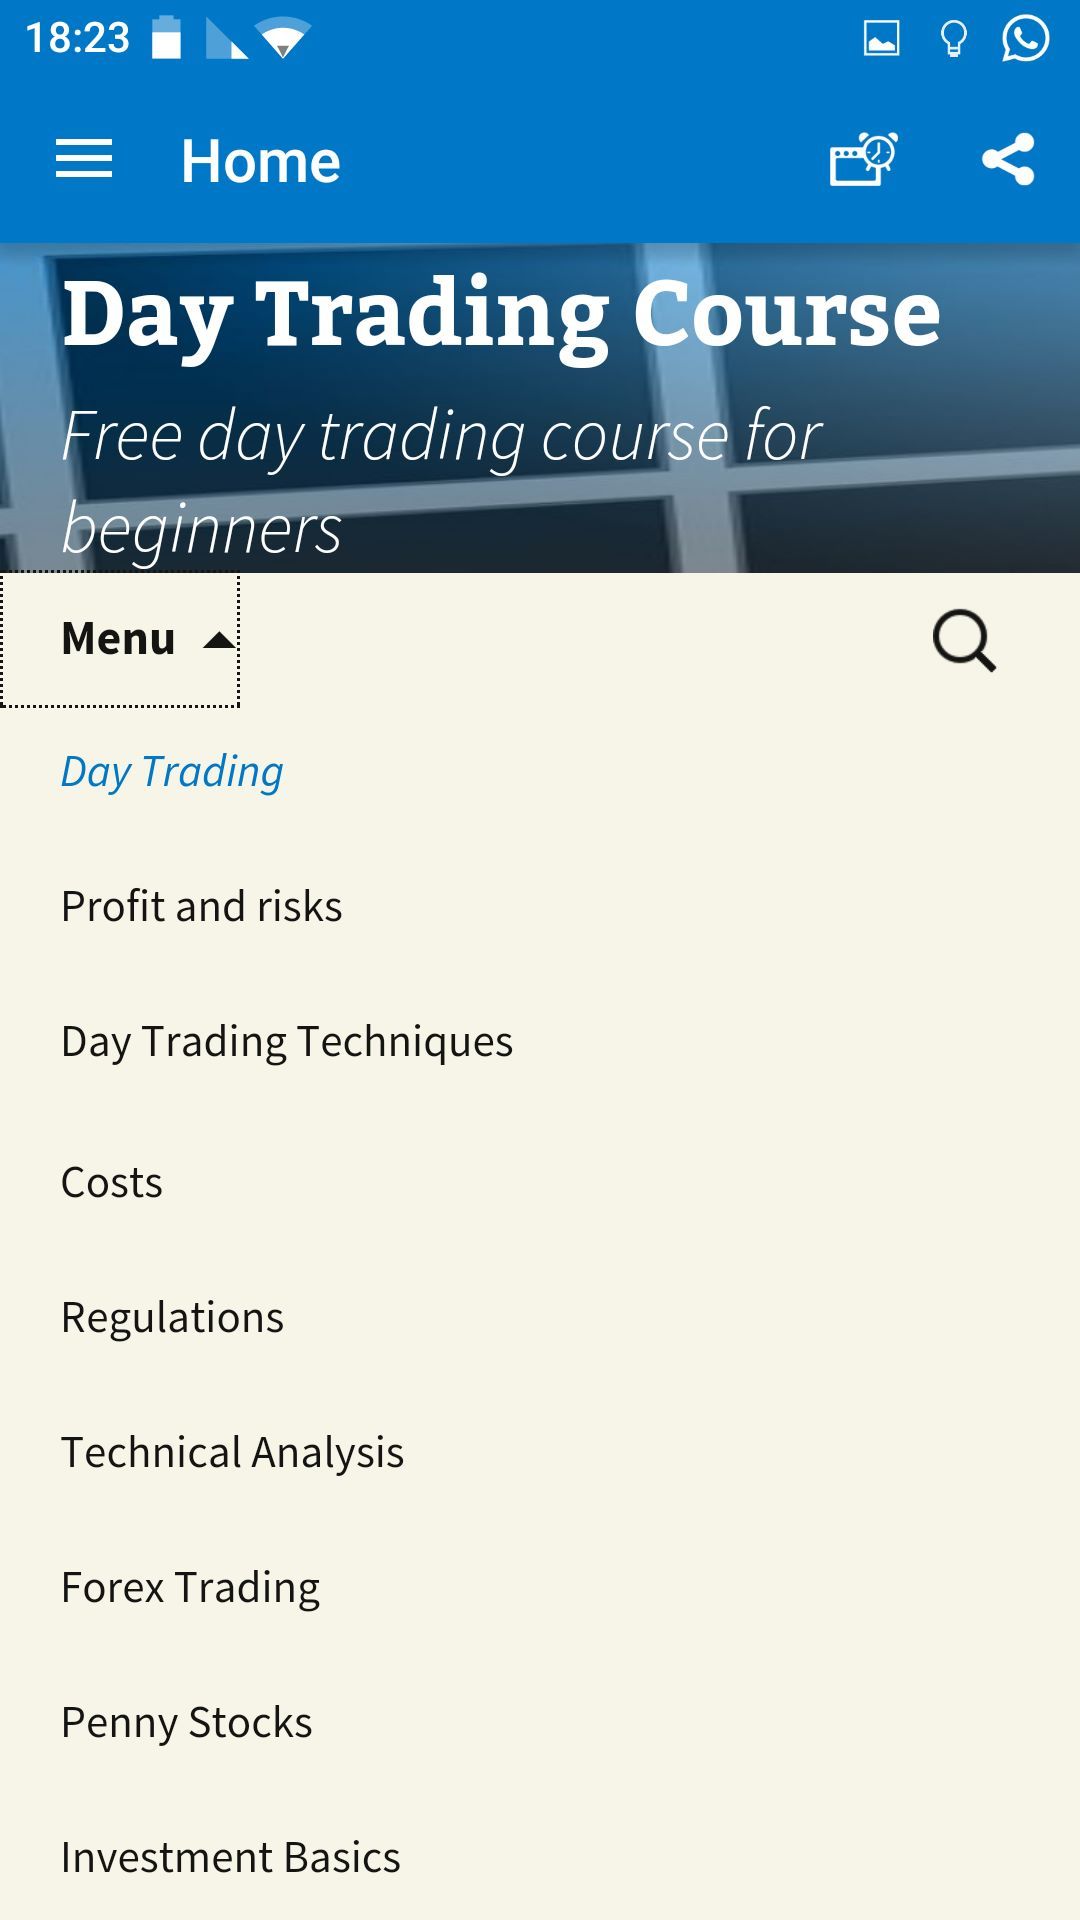 Stock Market Day Trade Course - Investment course for beginner and experienced investors